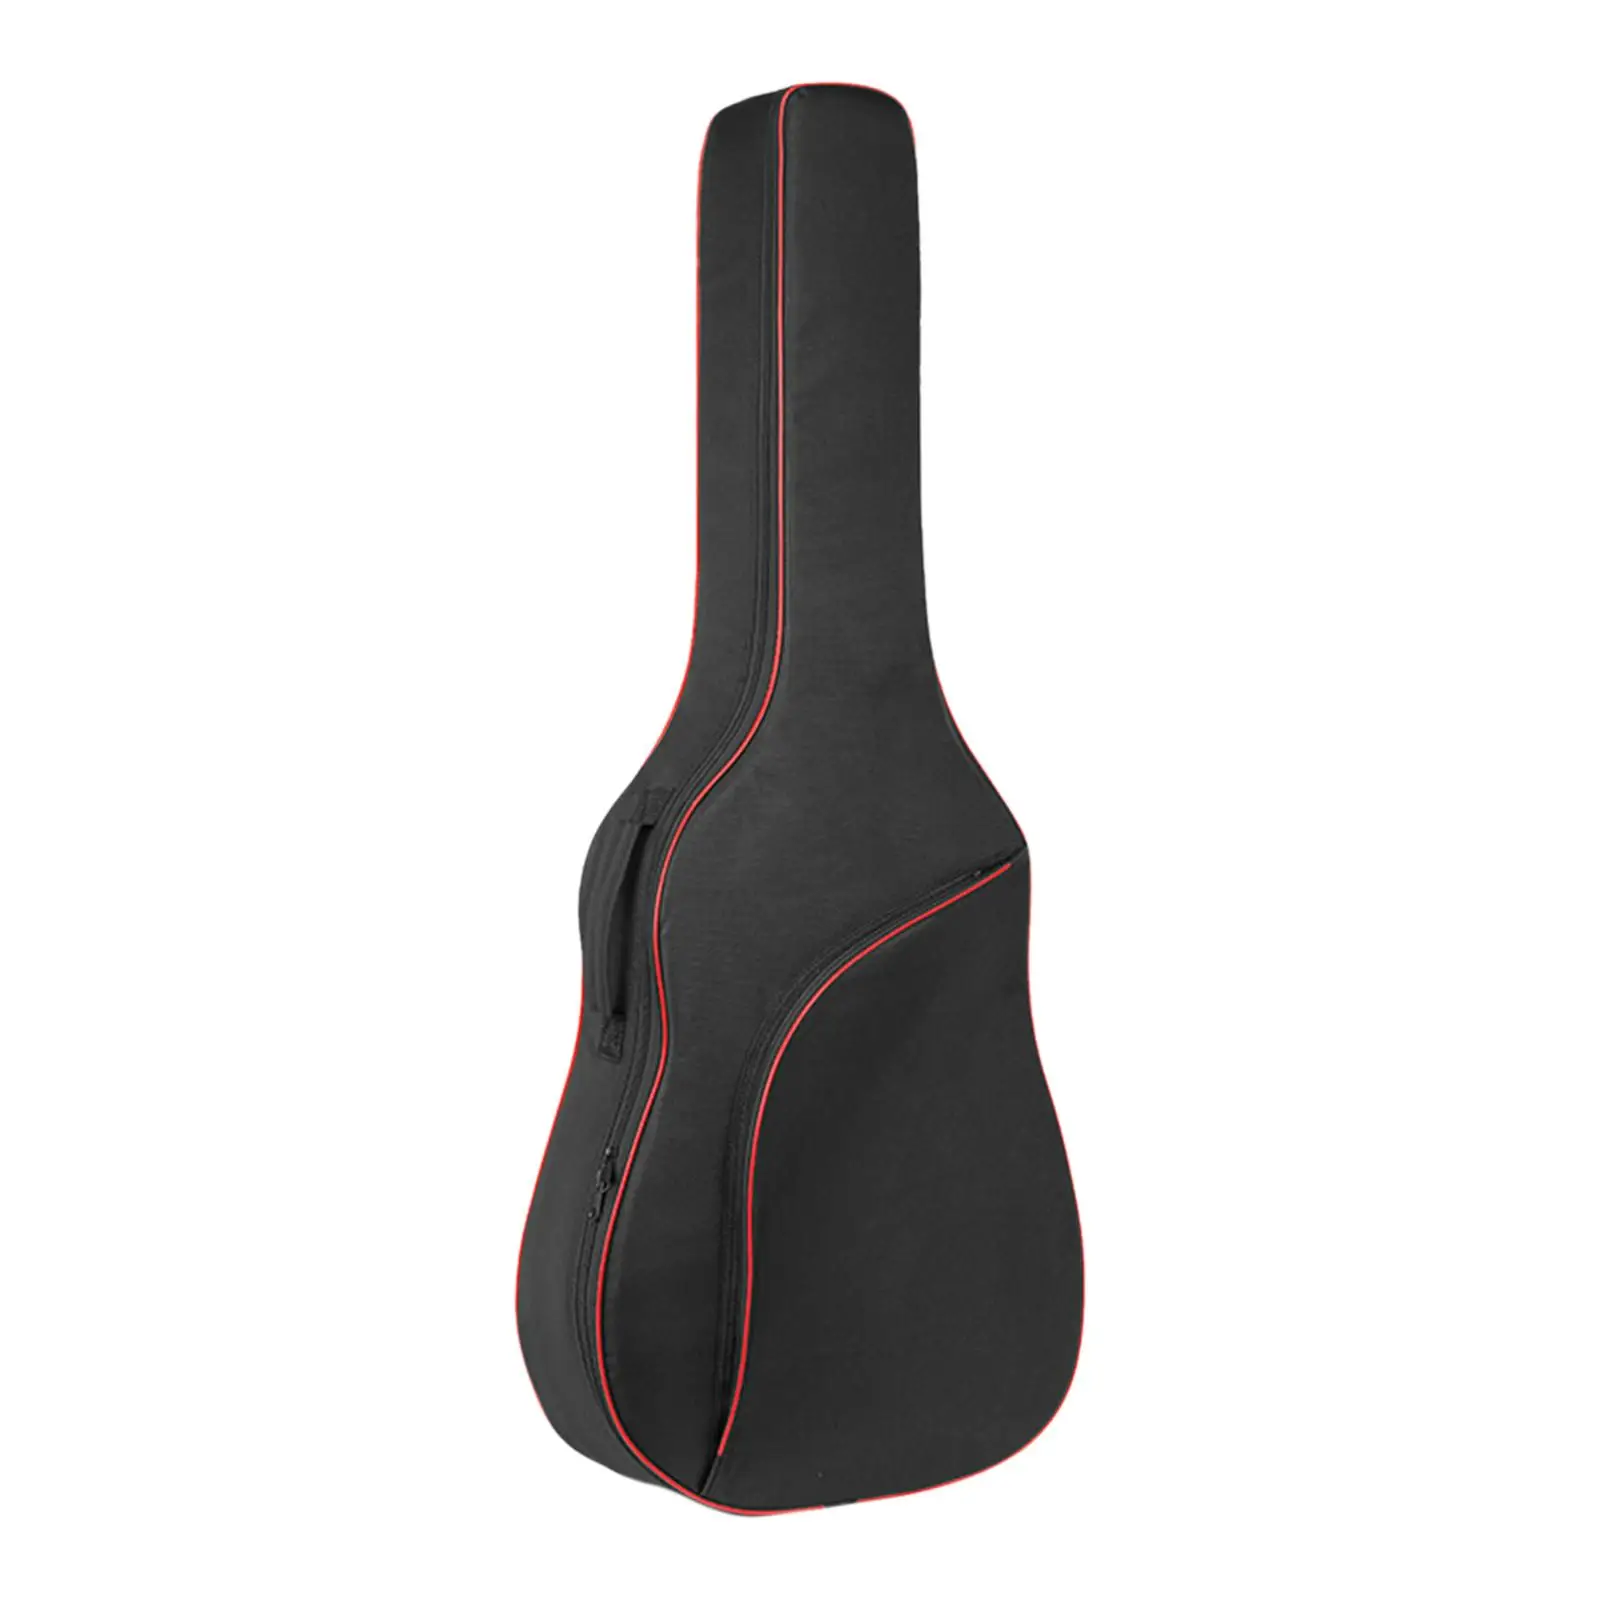 Portable Electric Guitar Bag Guitar Case Protective Carry Case with Pockets Guitar Backpack for Ukulele Beginners Gifts